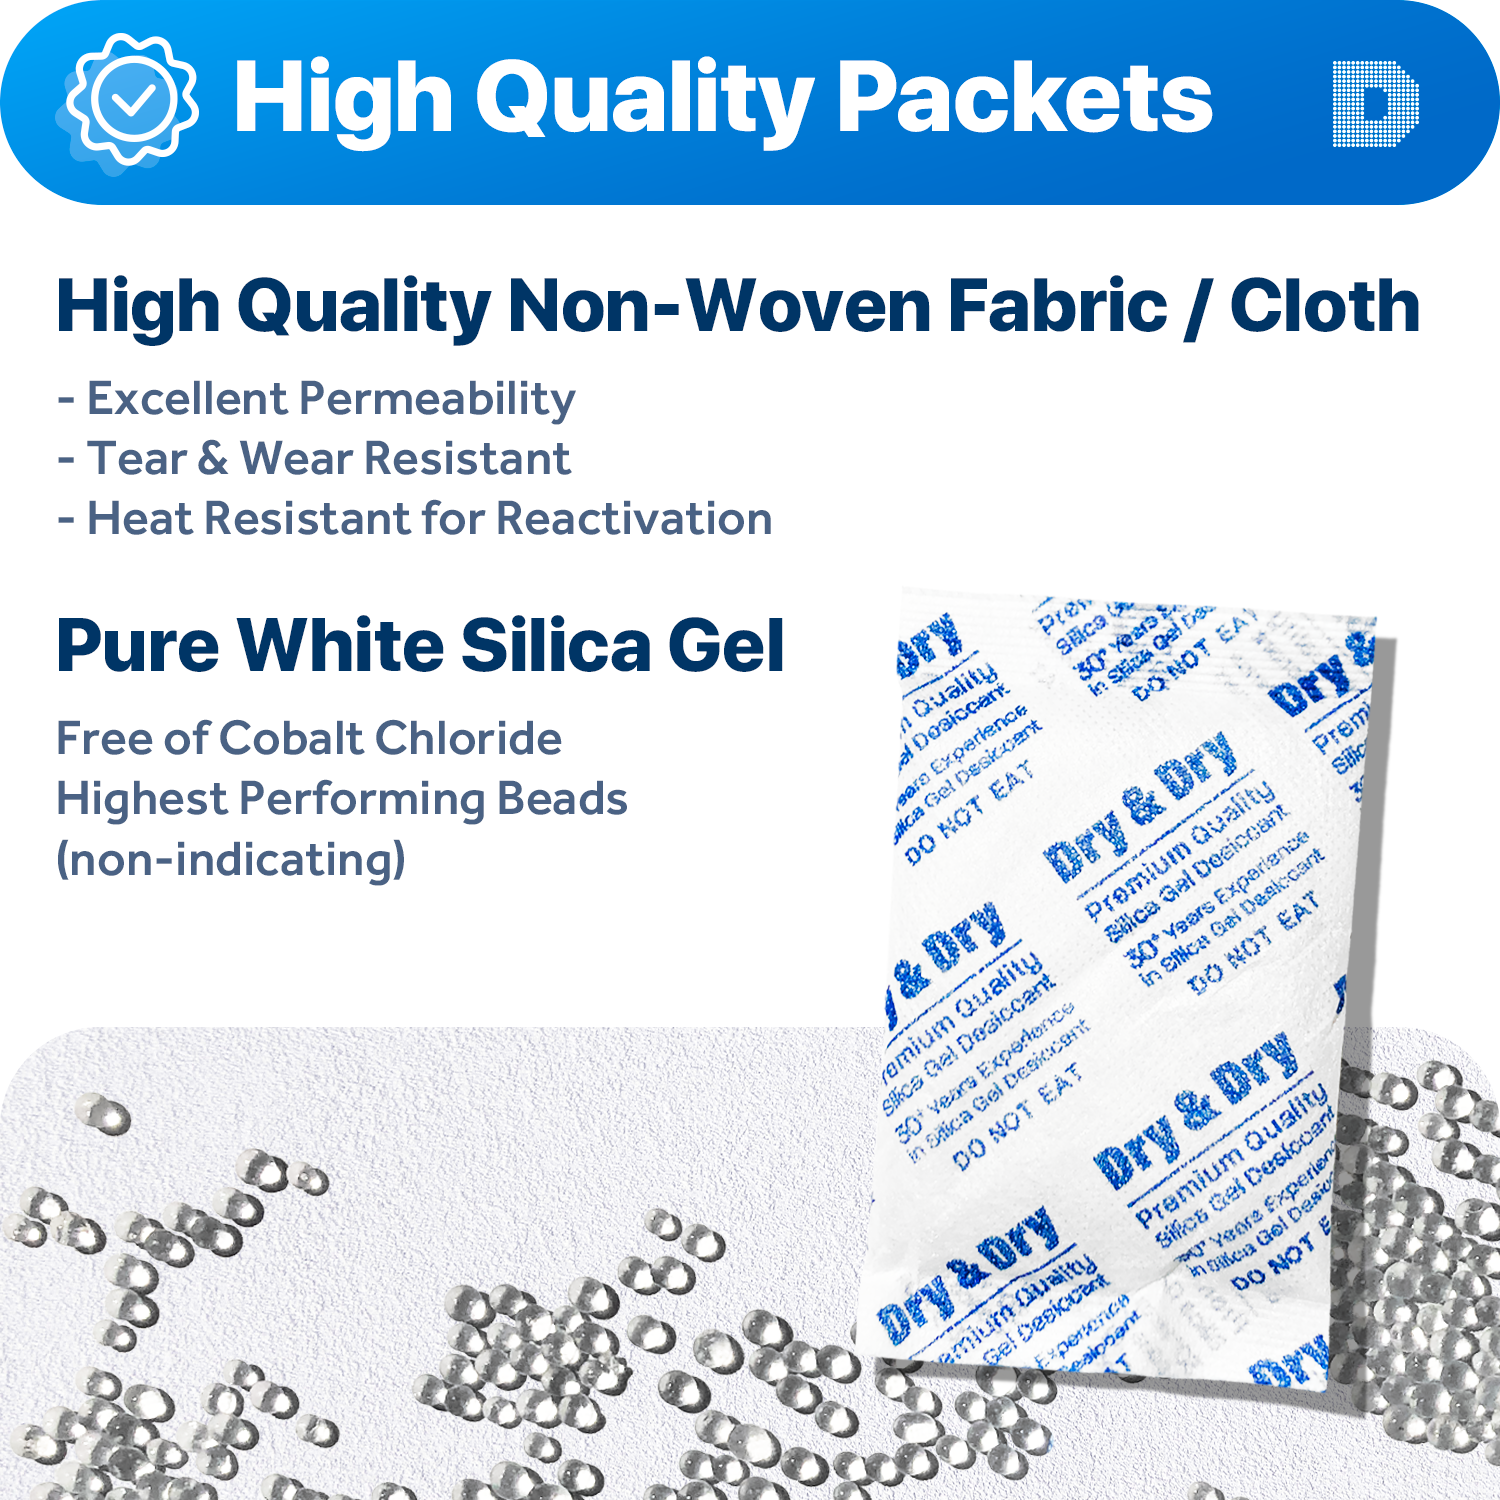 30 gram [600 Packets] "Dry & Dry" Premium Silica Gel Desiccant Packets - Rechargeable Fabric